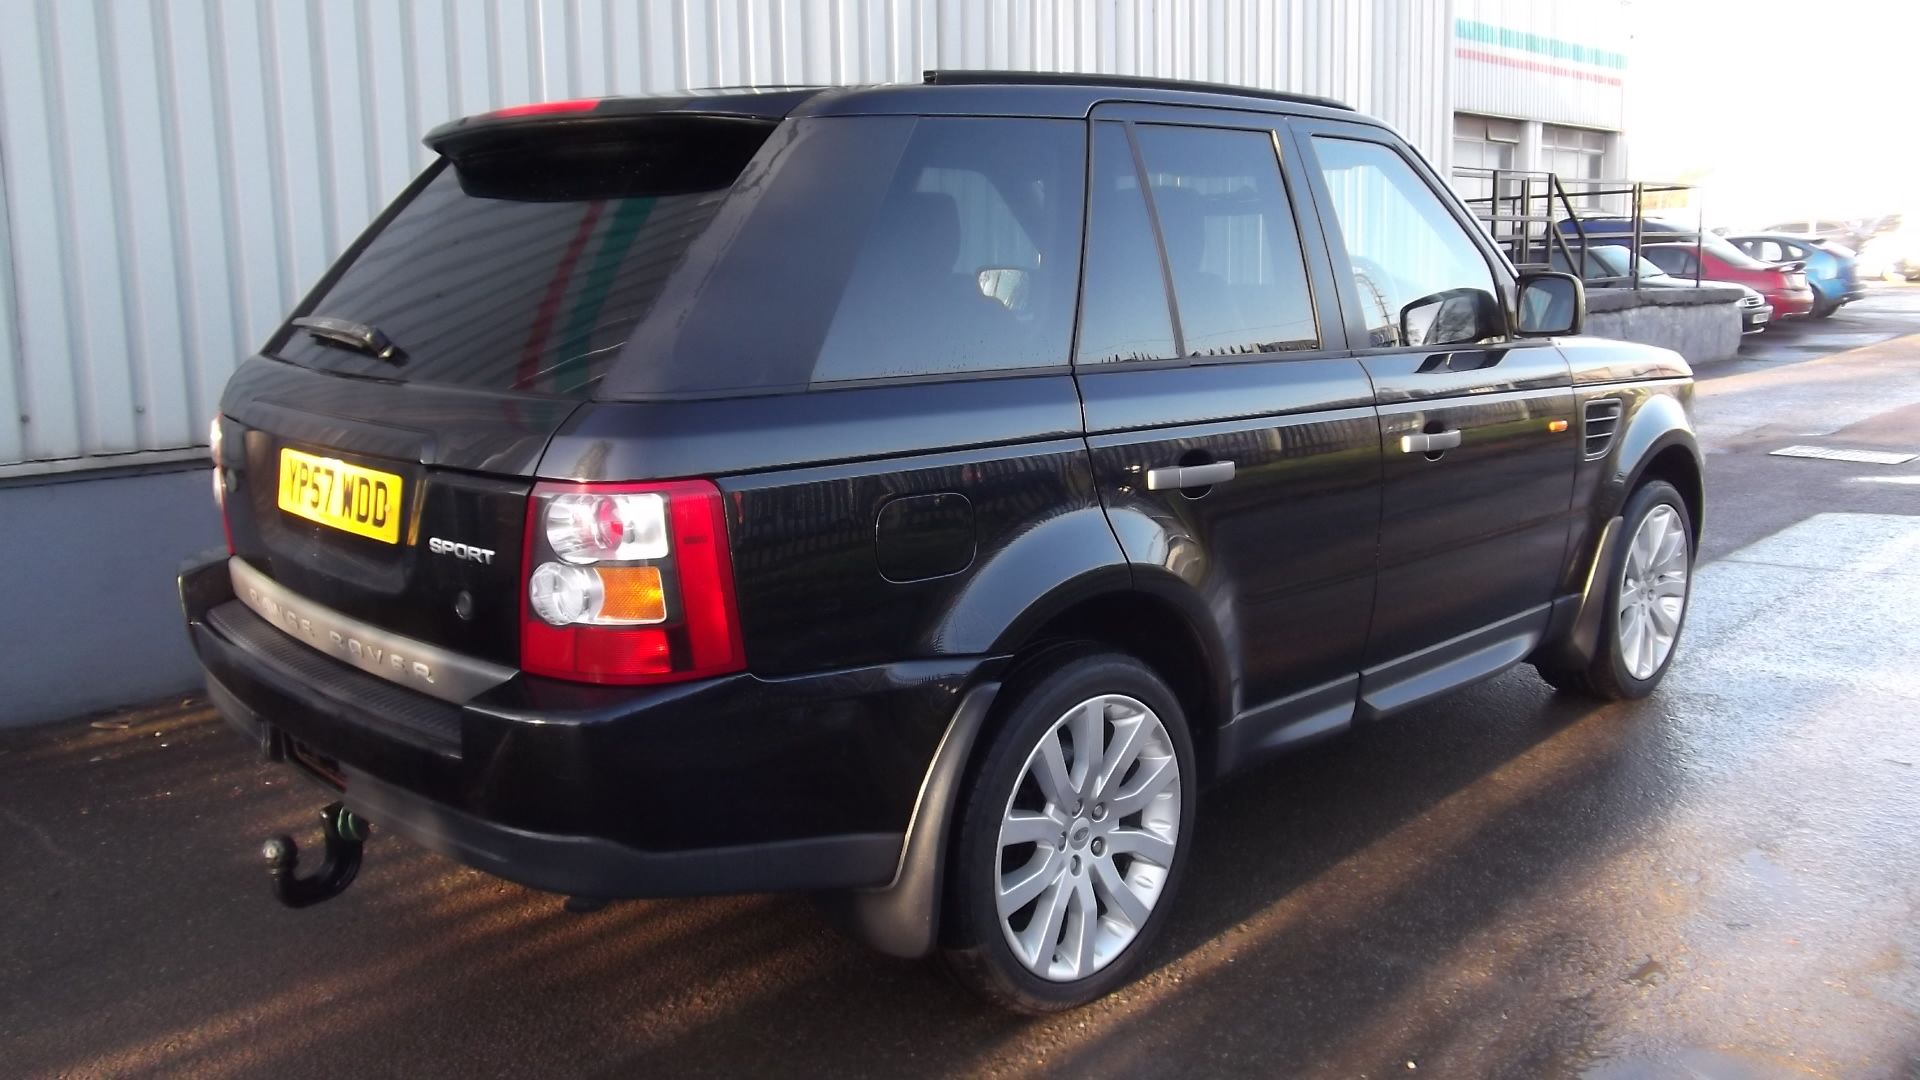 2007 Land Rover Range Rover Sport 2.7 TDV6 5Dr 4x4 - CL505 - NO VAT ON THE HAMMER - Locatio - Image 7 of 17